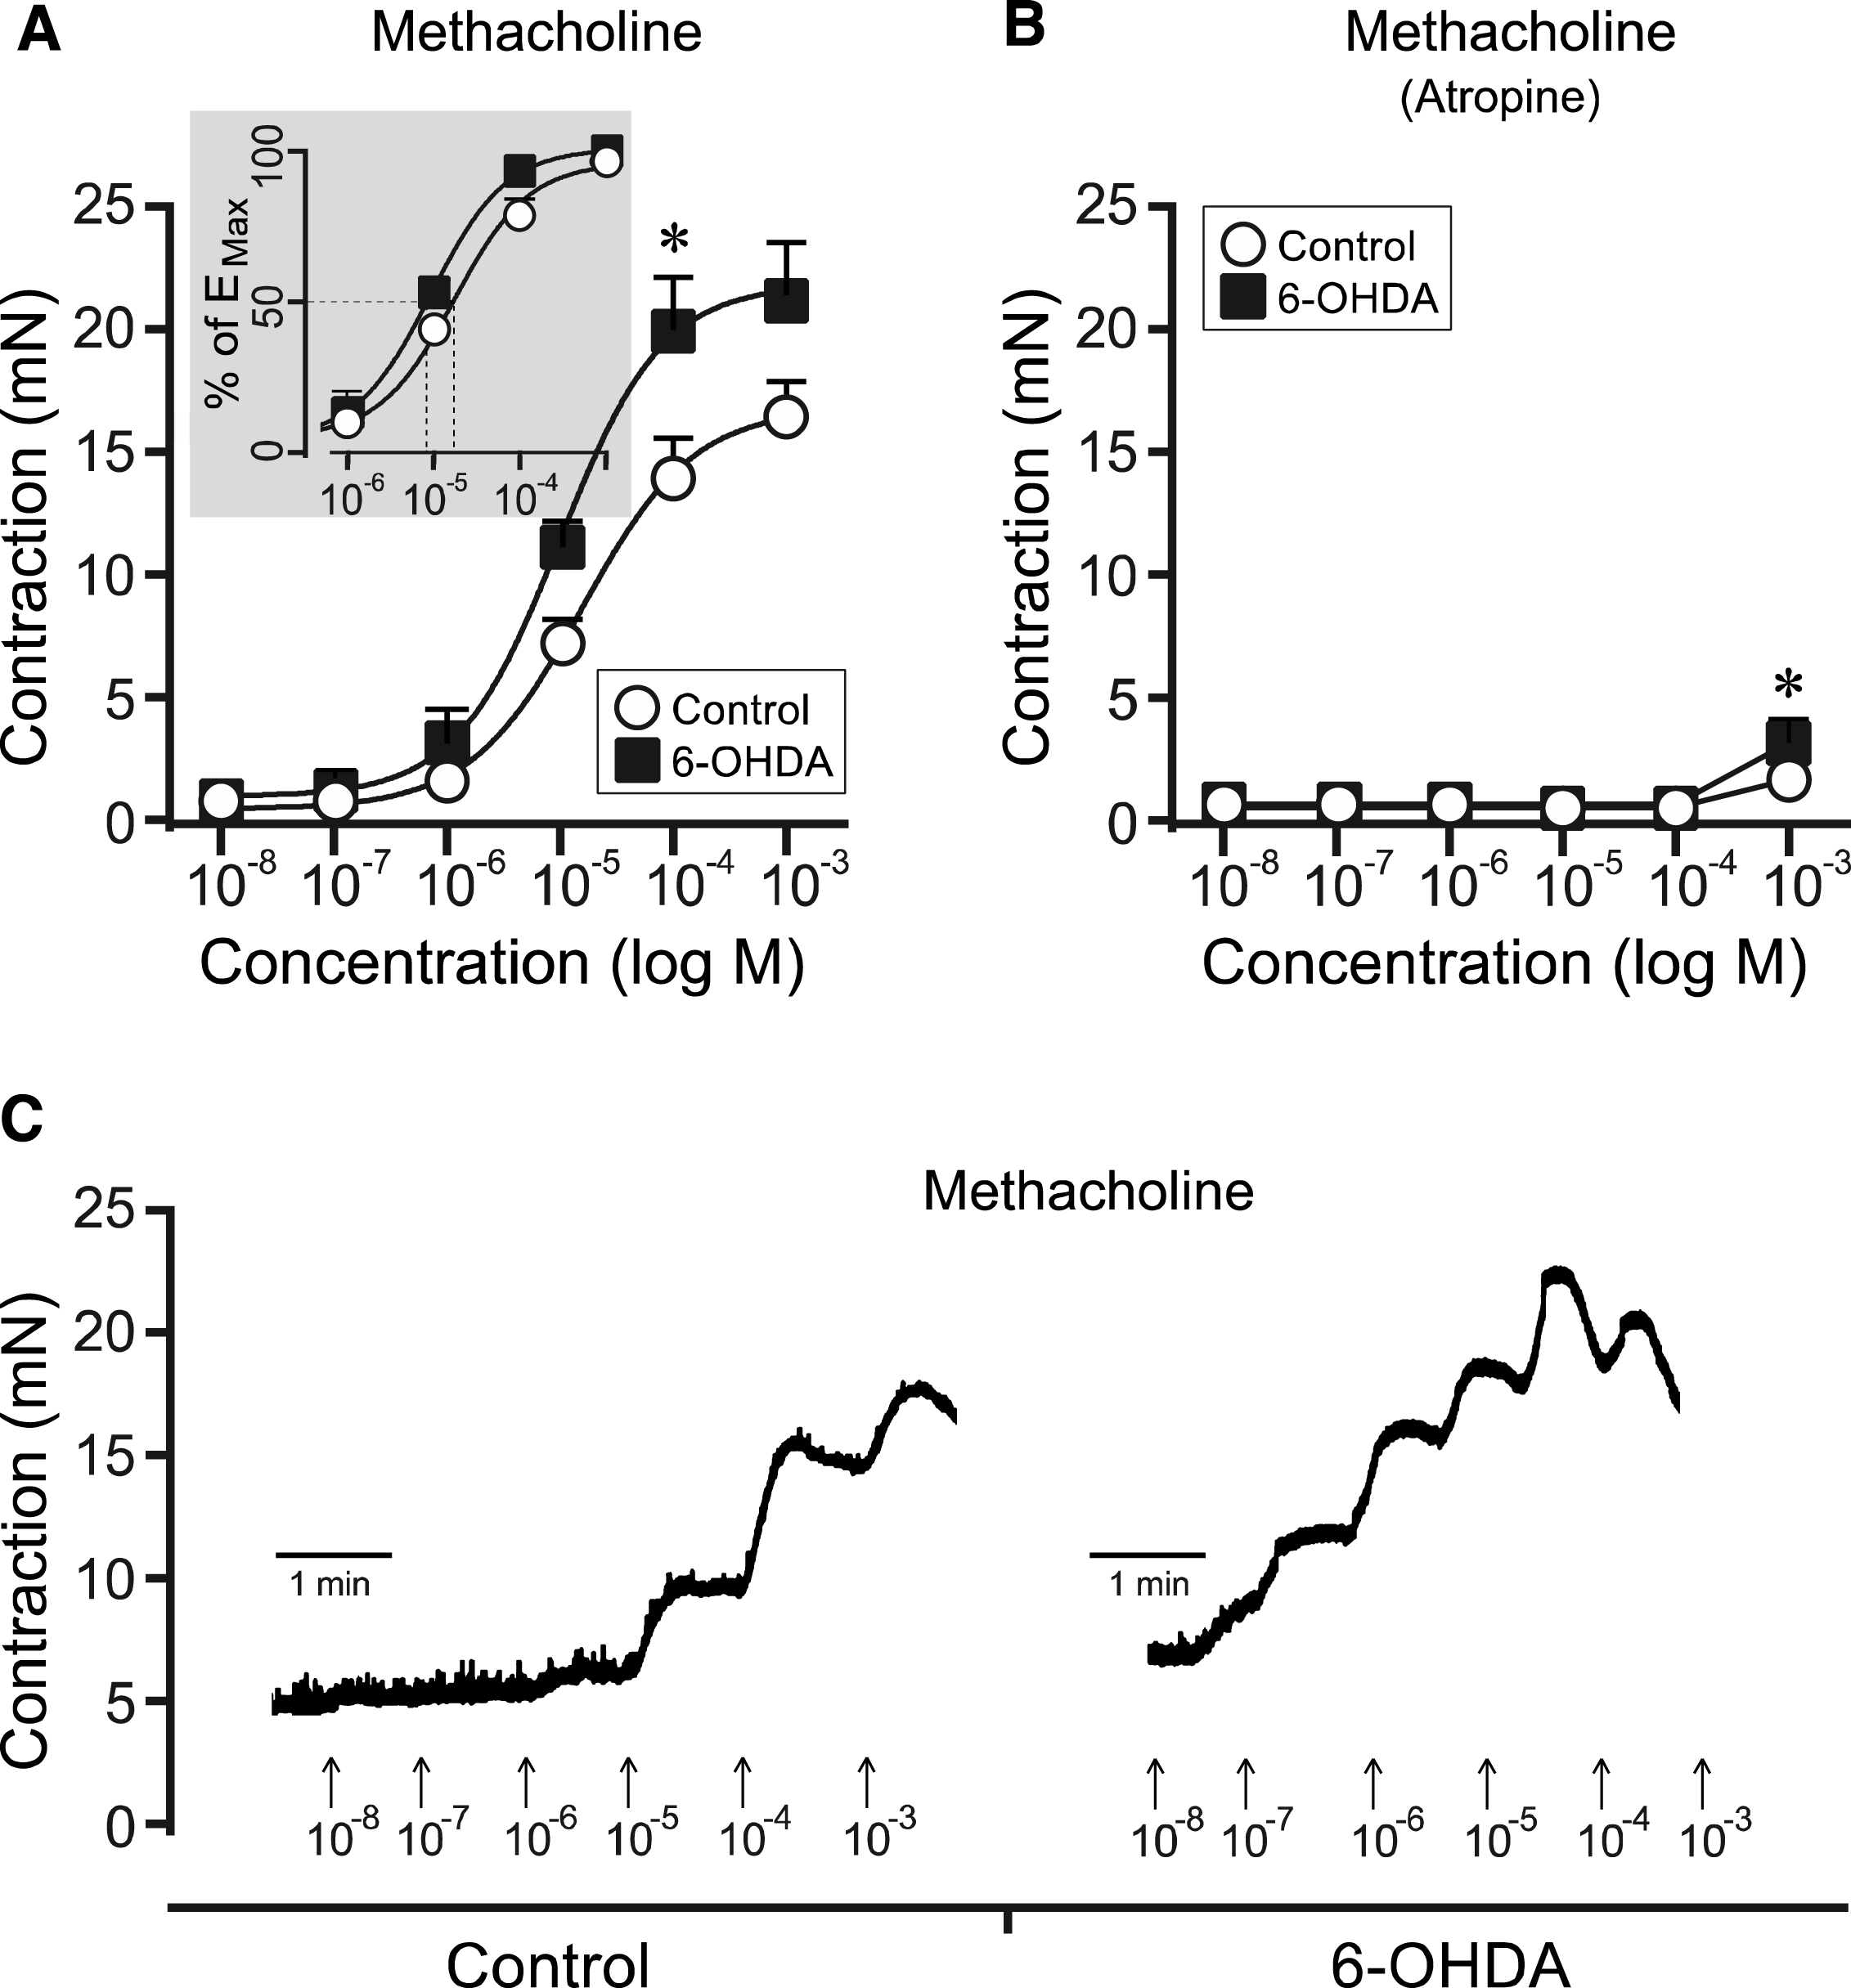 Methacholine-induced responses in bladder strips from controls and 6-OHDA-lesioned rats. Following cumulative administration of methacholine the bladder strips from the 6-OHDA-lesioned rats (n = 10) showed an overall significantly increased contractile response as compared to controls (n = 27; A). This response could specifically be observed at a concentration of 10 −
4 M (A, C). The EC50 showed also a significant left-shift in the 6-OHDA group as compared to controls (Insert, Panel A) Further, in the presence of atropine (10 −
6 M) the methacholine response was almost completely blocked (B). Significance was nevertheless still observed at the highest dose administered (10 −
3 M).  * = significantly different from control. [Two-way repeated ANOVAs; (A) interaction: F(5, 175) = 2.71, p = 0.022, Group: F(1, 35) = 5.24, p = 0.028; (B) interaction: F(5, 175) = 3.93, p = 0.0021, Group: F(1, 35) = 5.79, p = 0.022; All ANOVAS are followed by a Bonferroni multiple comparison test].